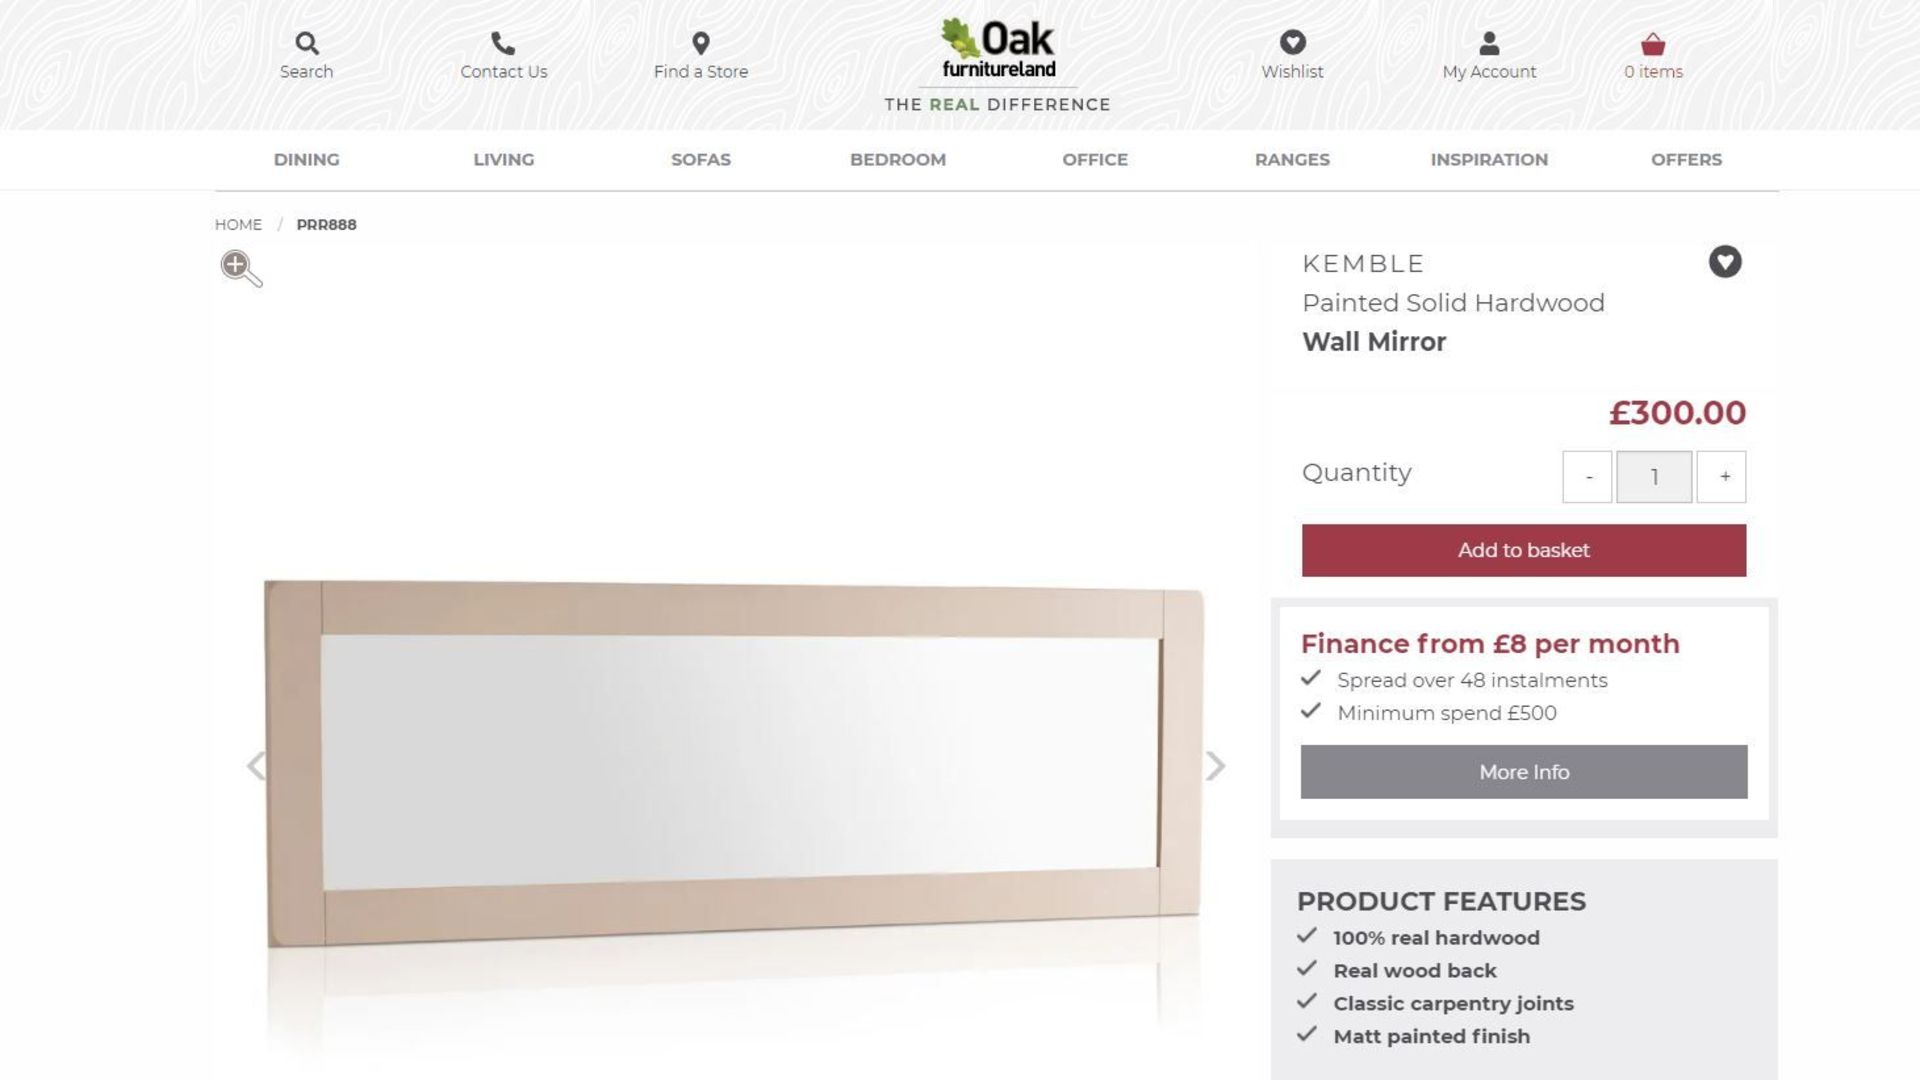 NEW BOXED KEMBLE RUSTIC SOLID OAK & PAINTED WALL MIRROR. 1800x600MM. RRP £300. 100% OAK, REAL WOOD